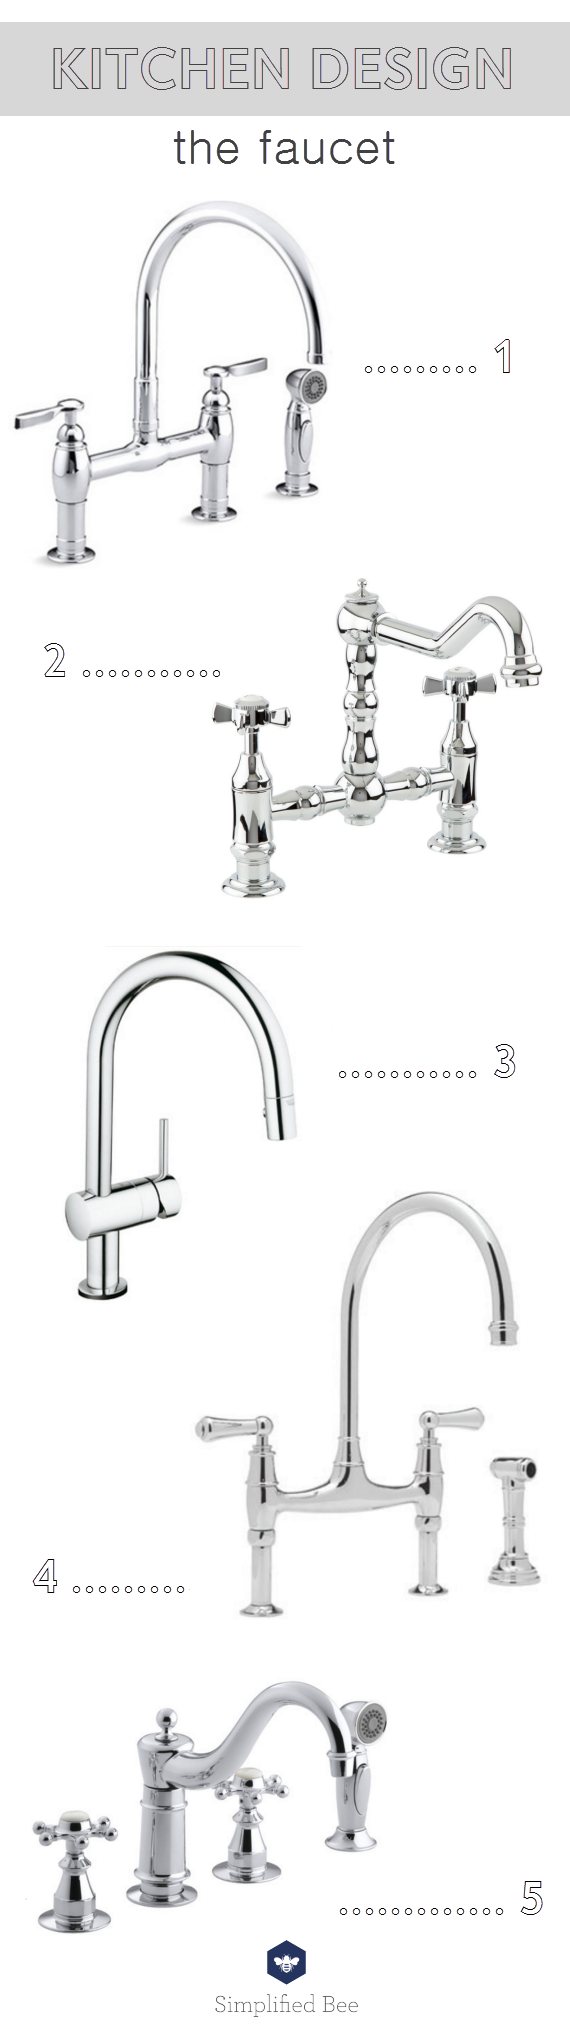 kitchen faucet round-up // @simplifiedbee